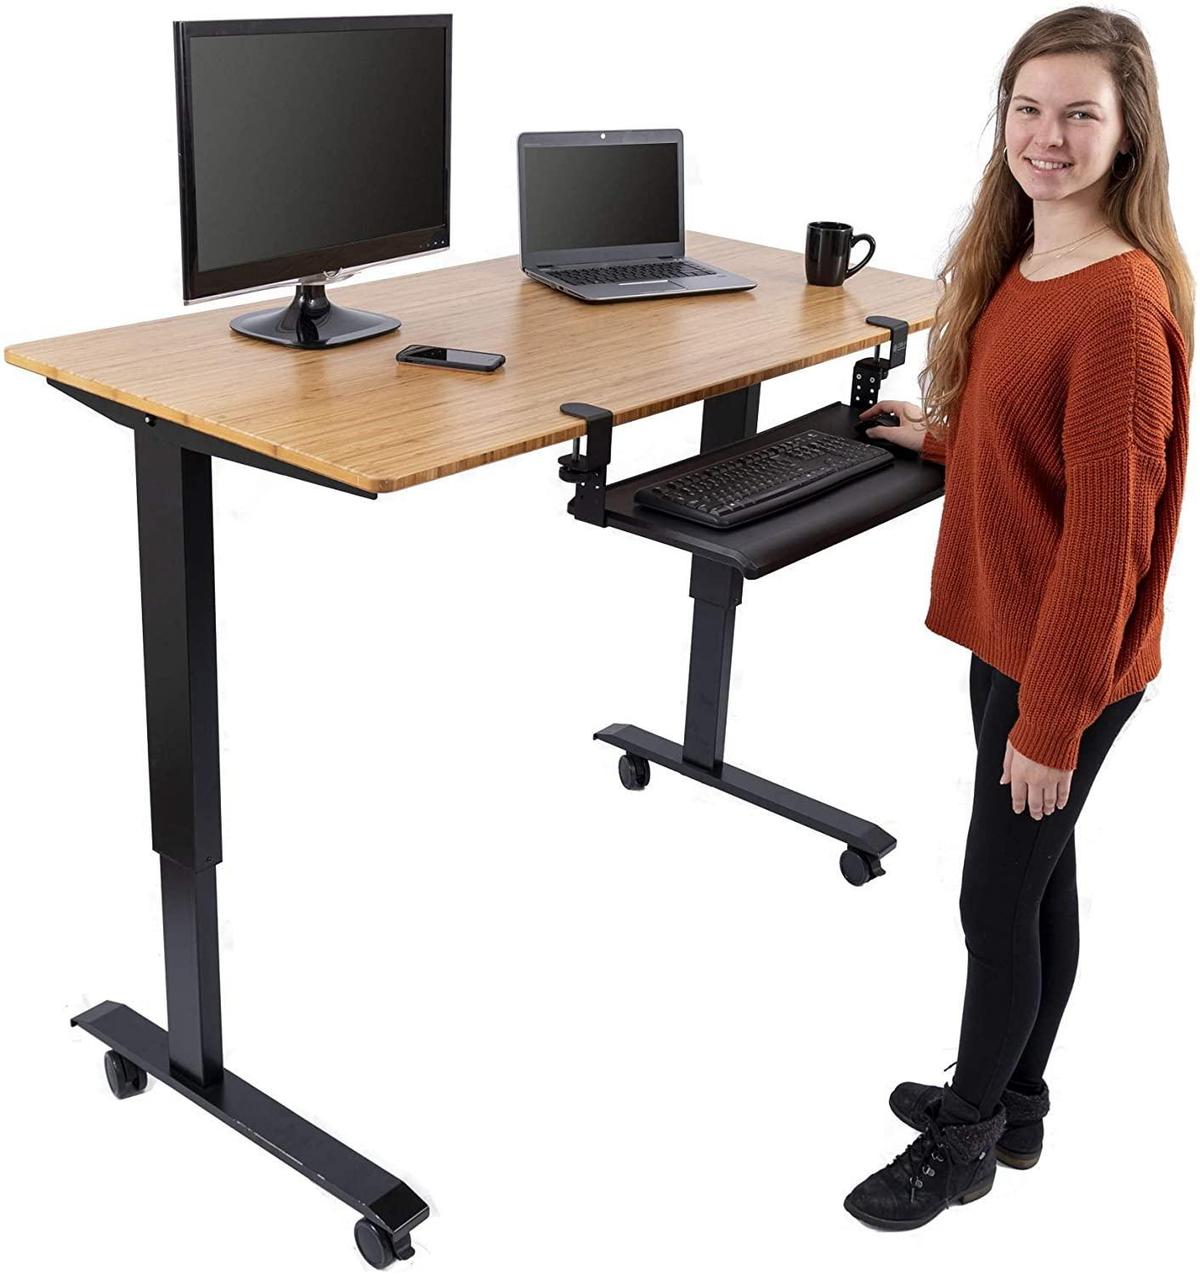 Stand Up Desk Store Large Clamp-On Retractable Adjustable Keyboard Tray - $94.97 MSRP